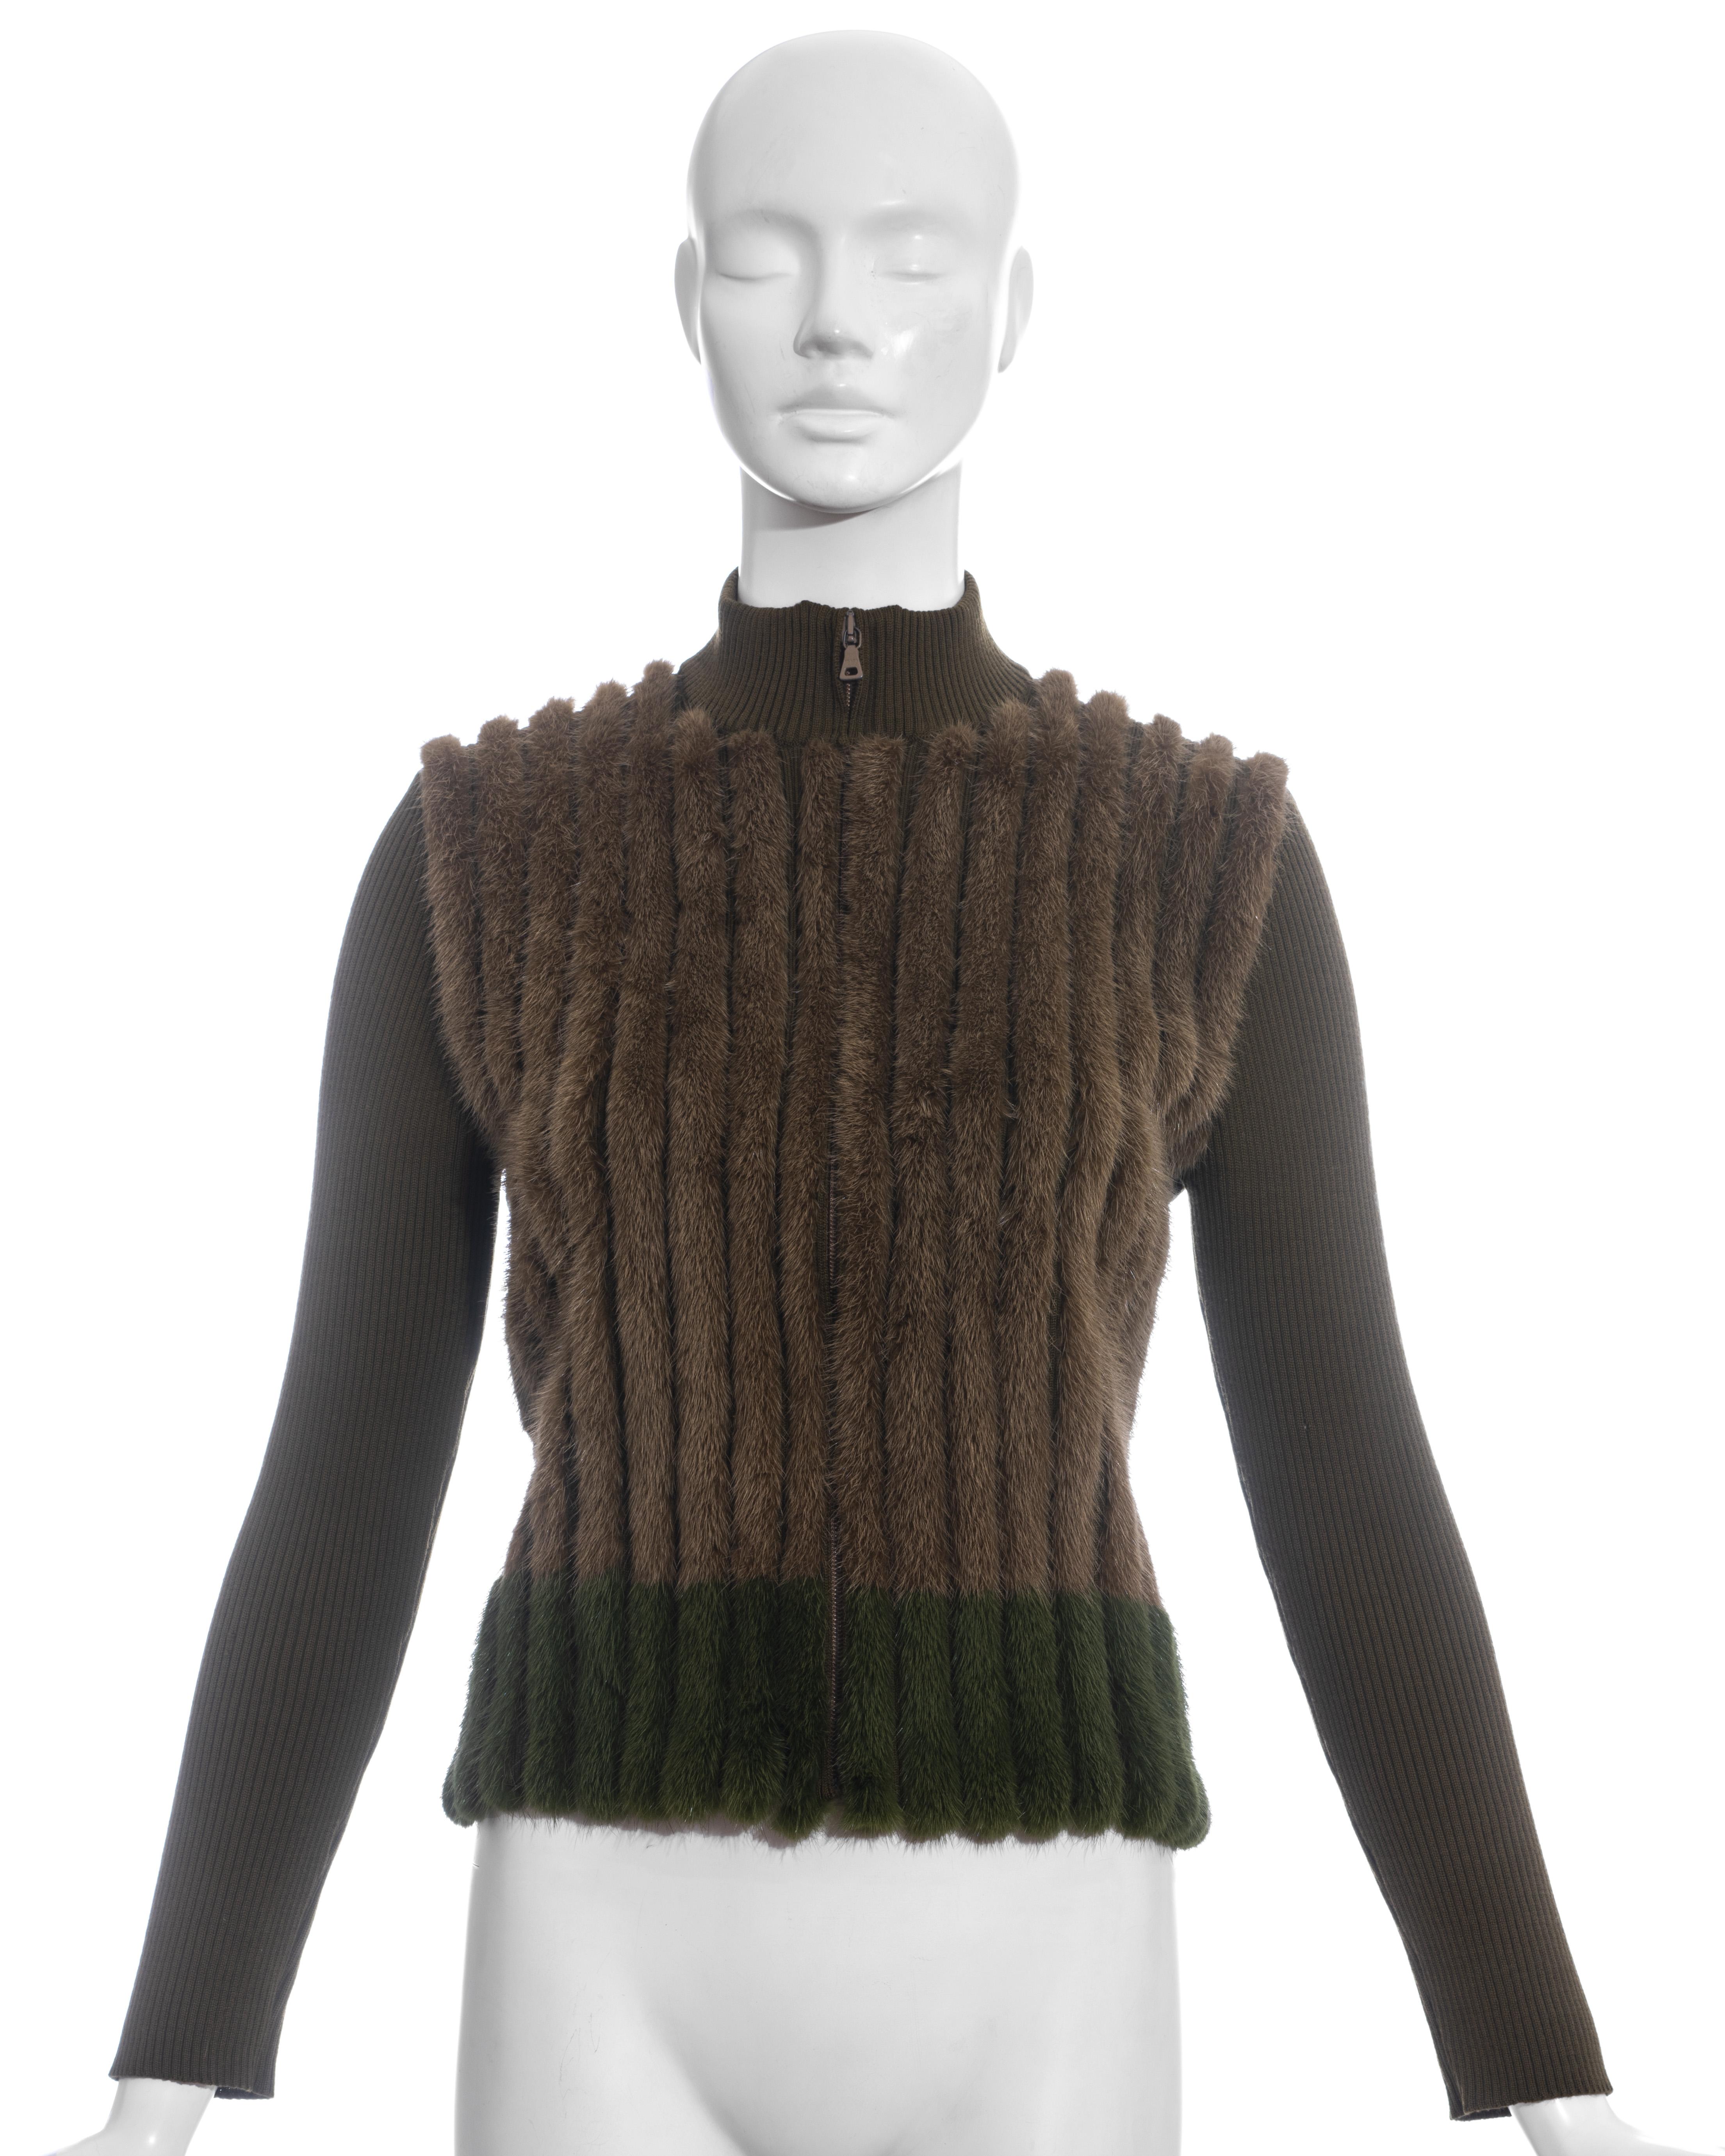 Prada green rib knit long sleeve cardigan with brown and green mink fur and front zip fastening.

Fall-Winter 2000